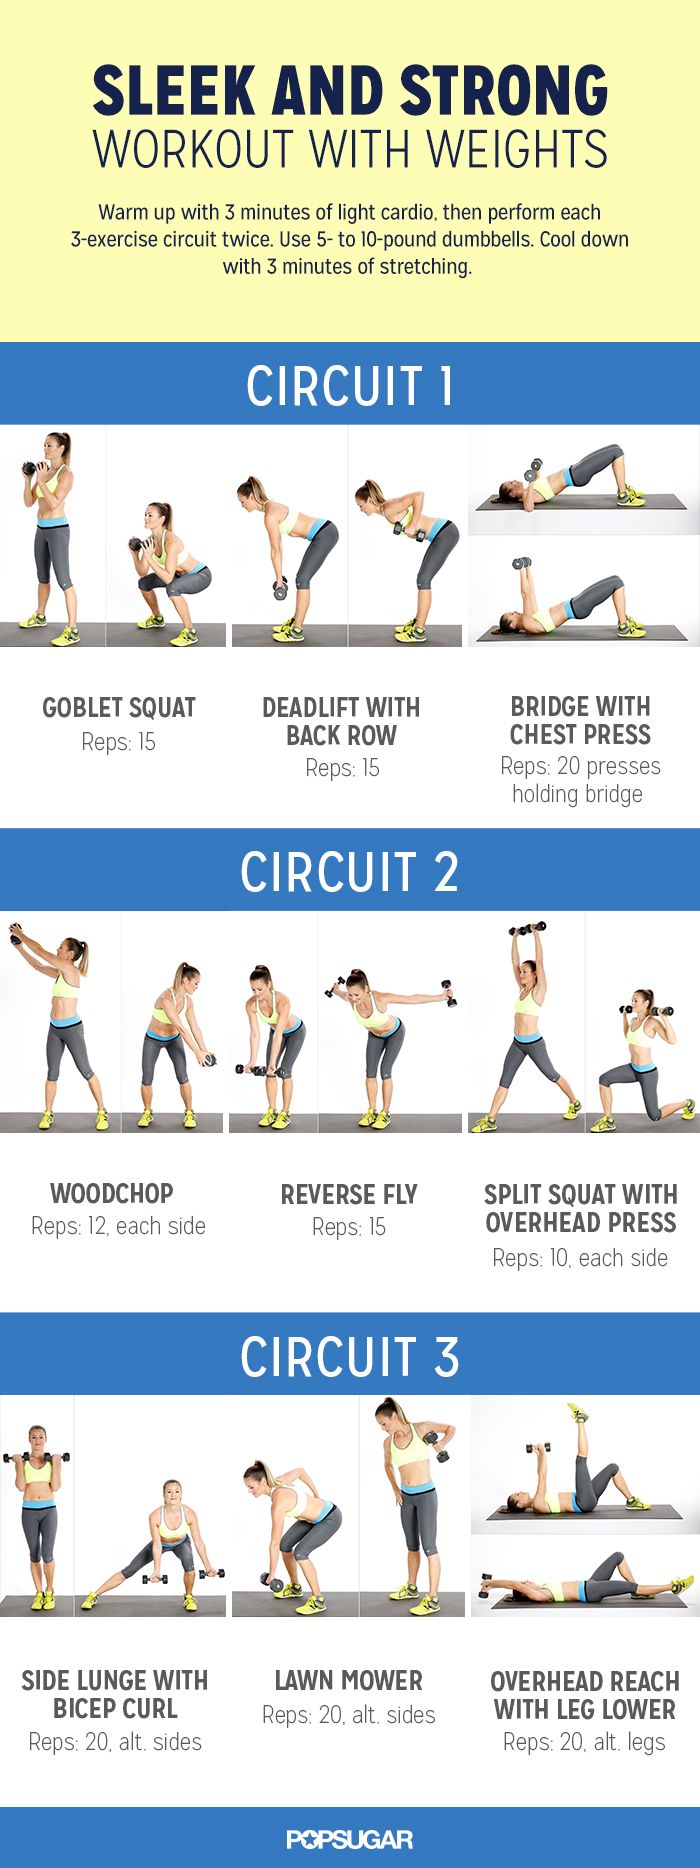 workout-with-weights-to-help-strengthen-your-core-pinpoint